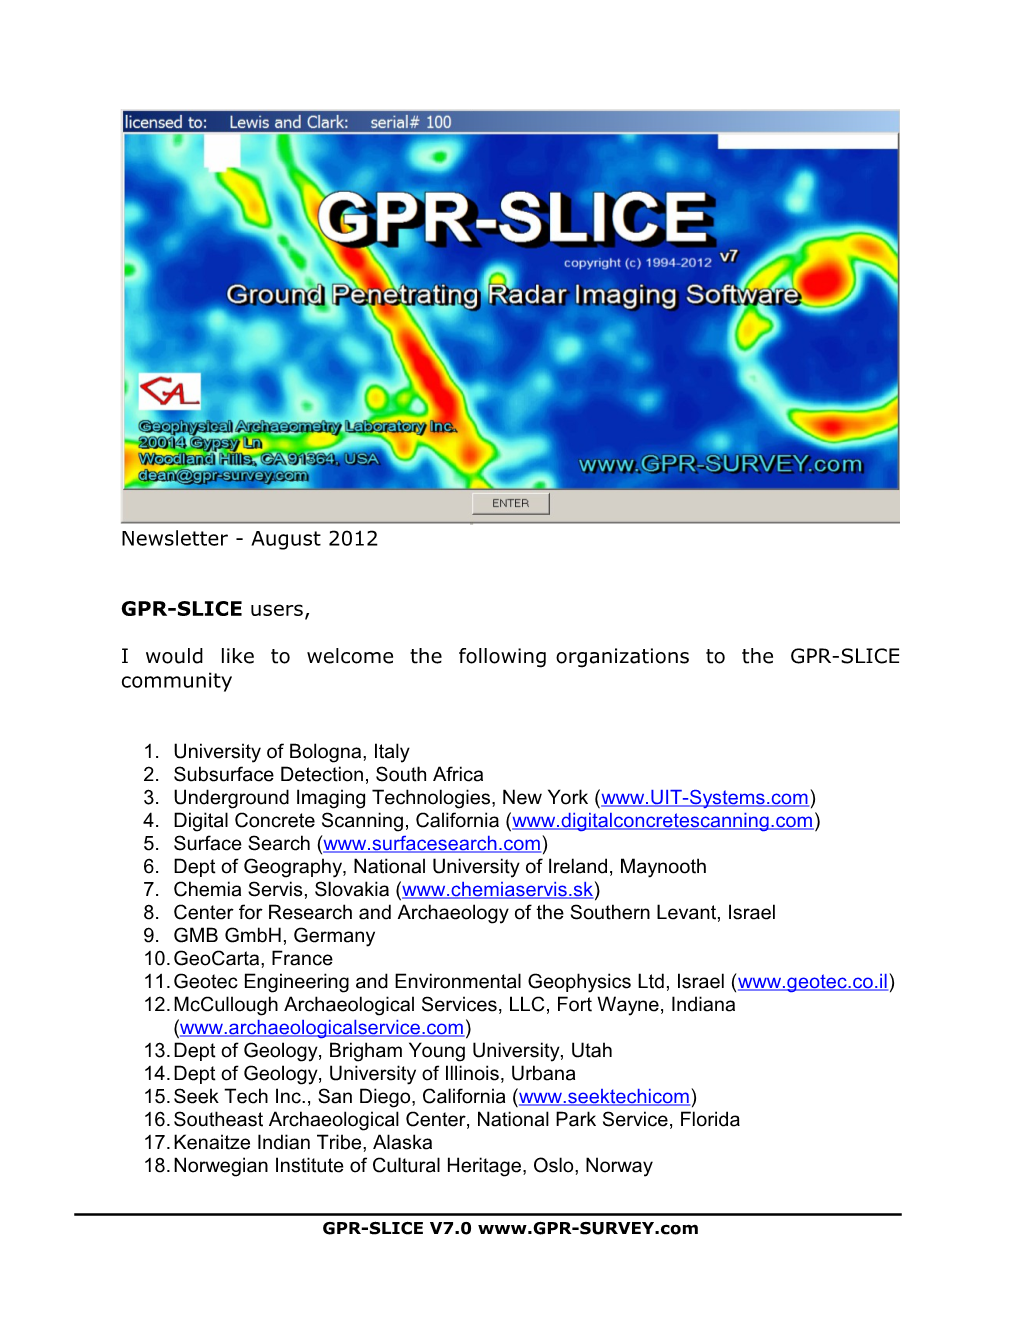 I Would Like to Welcome the Followingorganizations to the GPR-SLICE Community